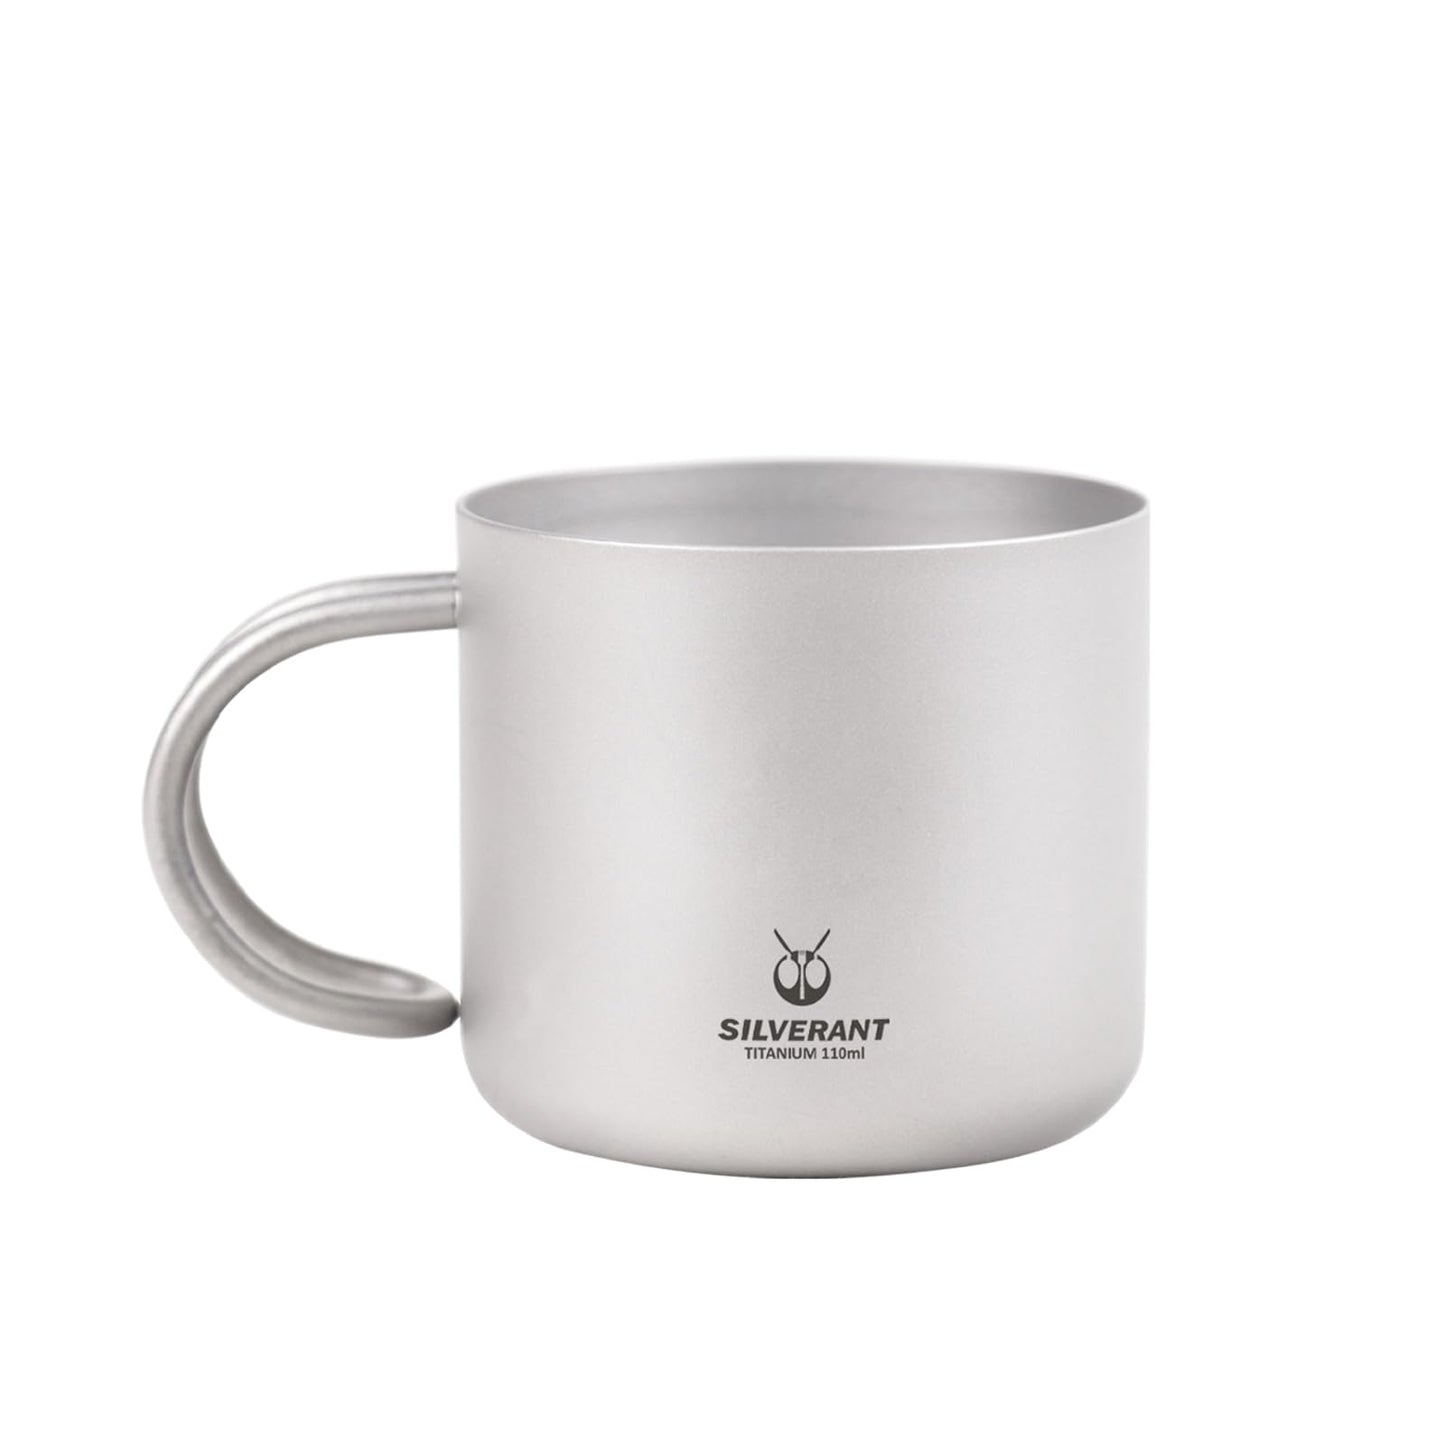 Titanium Double Wall Coffee Cup with Handle 110ml/3.71 fl oz - SilverAnt Outdoors